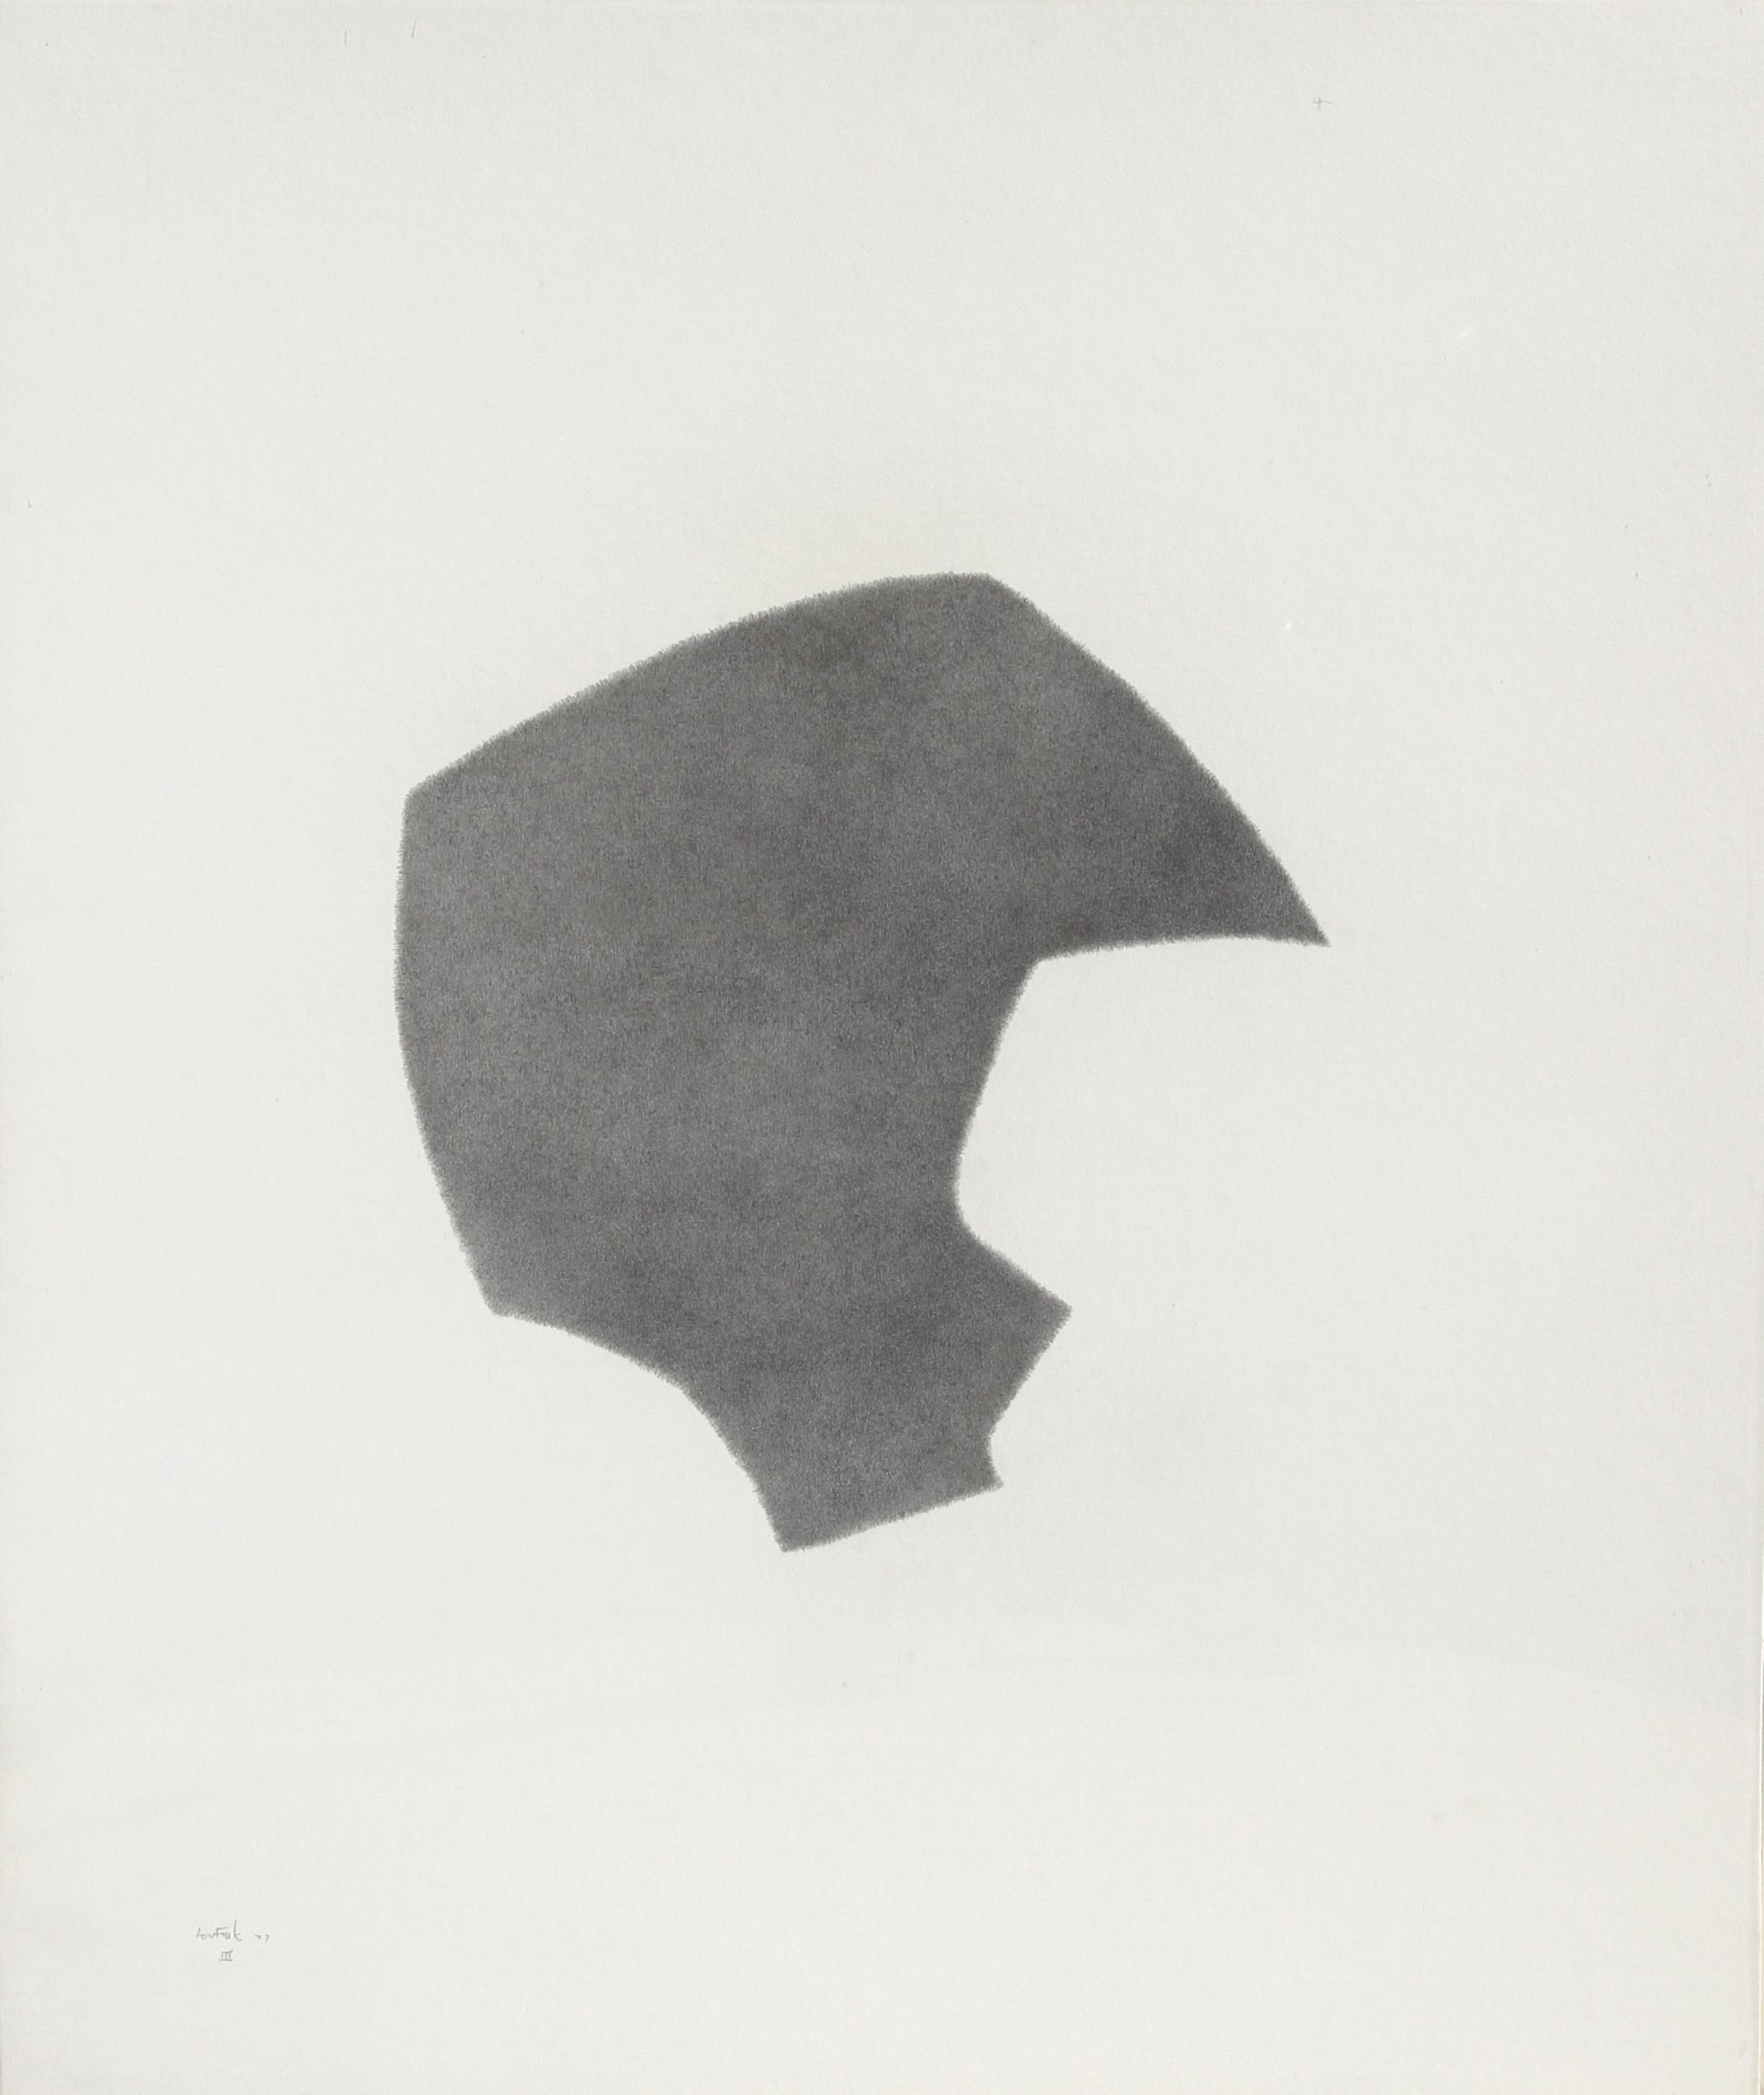 Artist: Lou Fink, American (1925 - 1980)
Title: Helmet #3
Year: 1977
Medium: Pencil on paper, signed and dated l.l.
Size: 24 in. x 20 in. (60.96 cm x 50.8 cm)